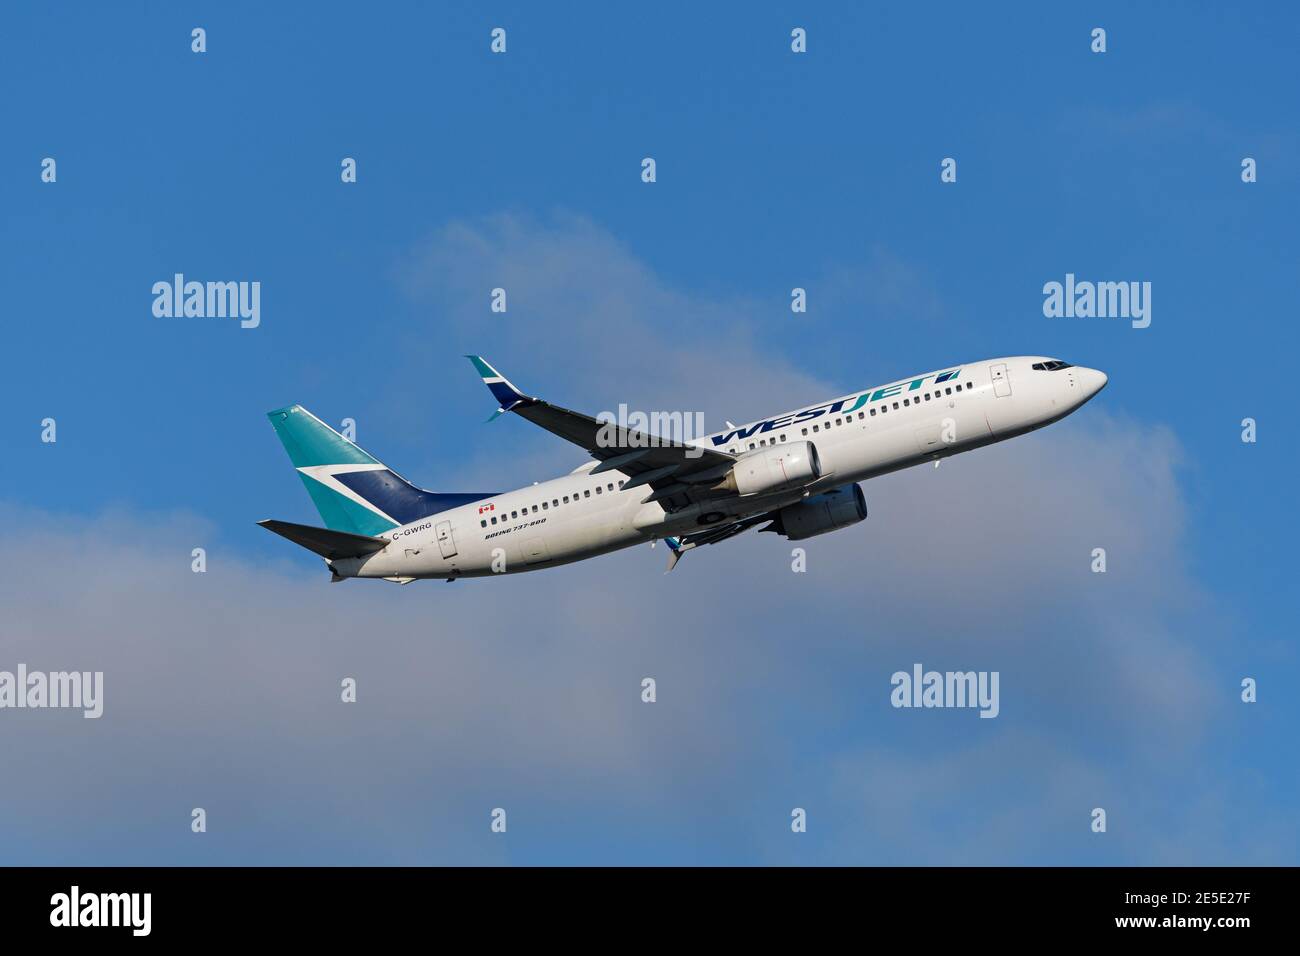 A WestJet Airlines Boeing 737-800 jetliner (C-GWRG) airborne after departure from Vancouver International Airport. Stock Photo